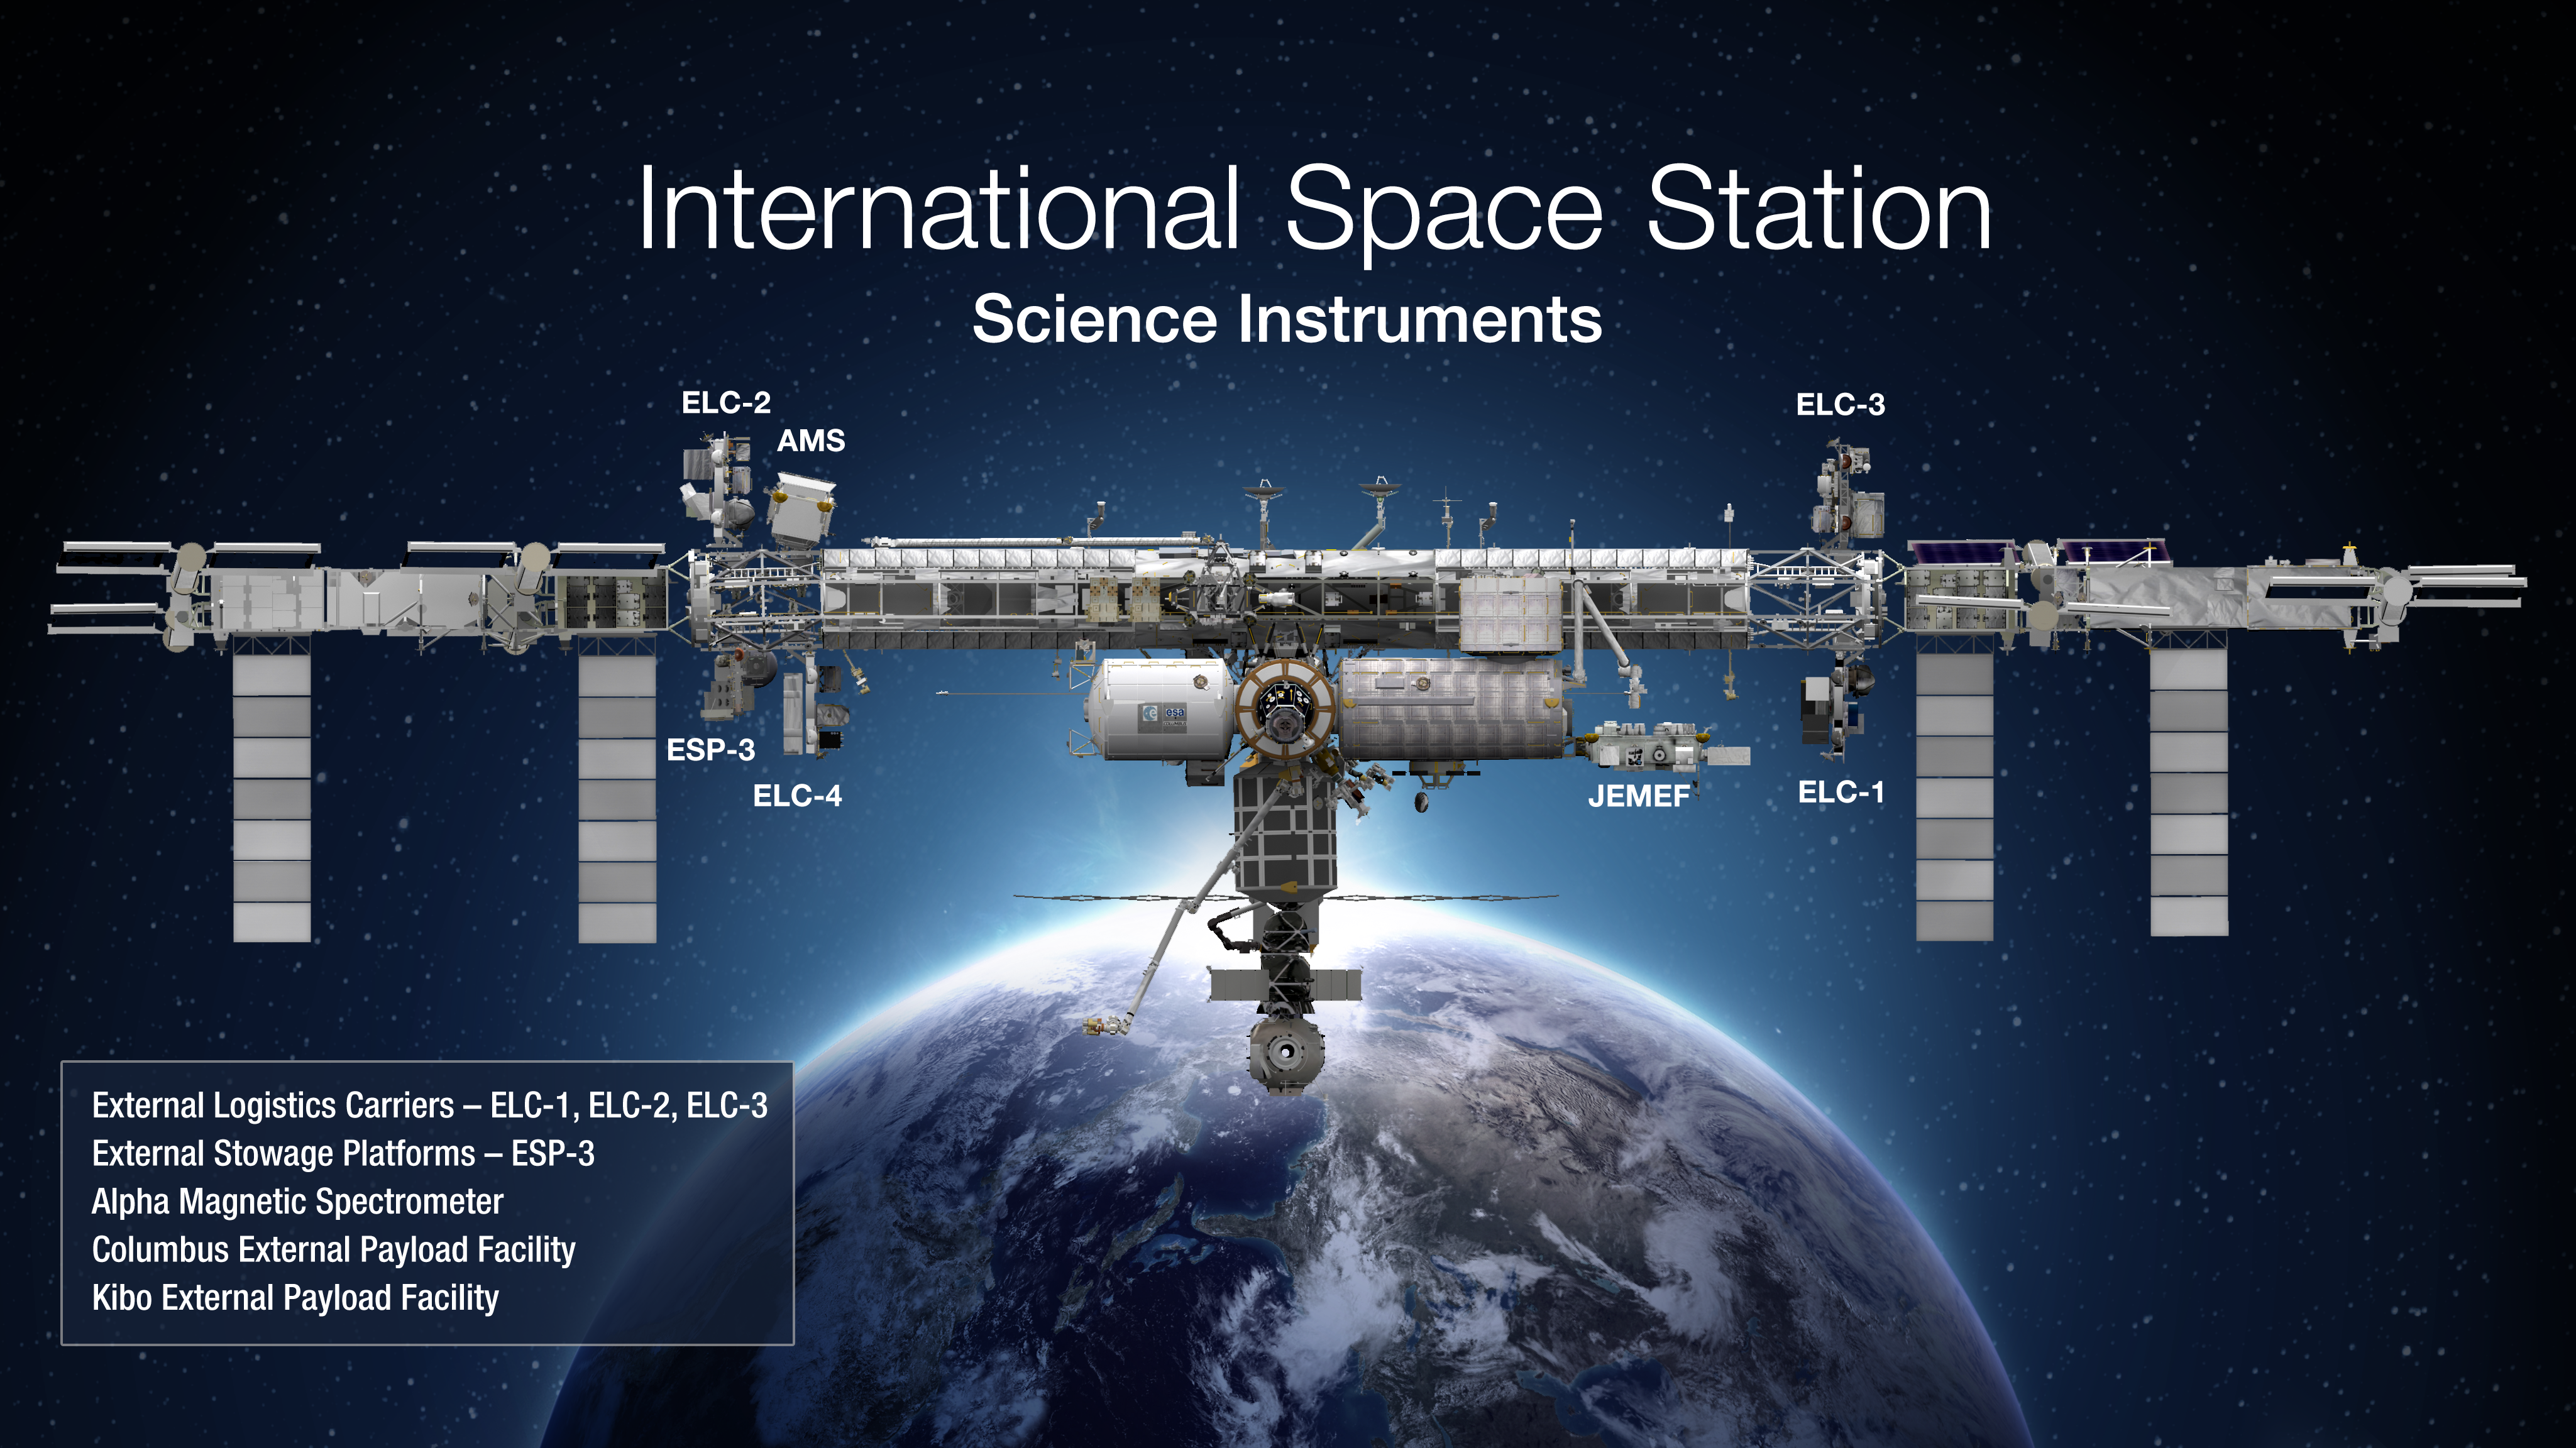 Hyperwall: NASA Science Facilities on the International Space Station